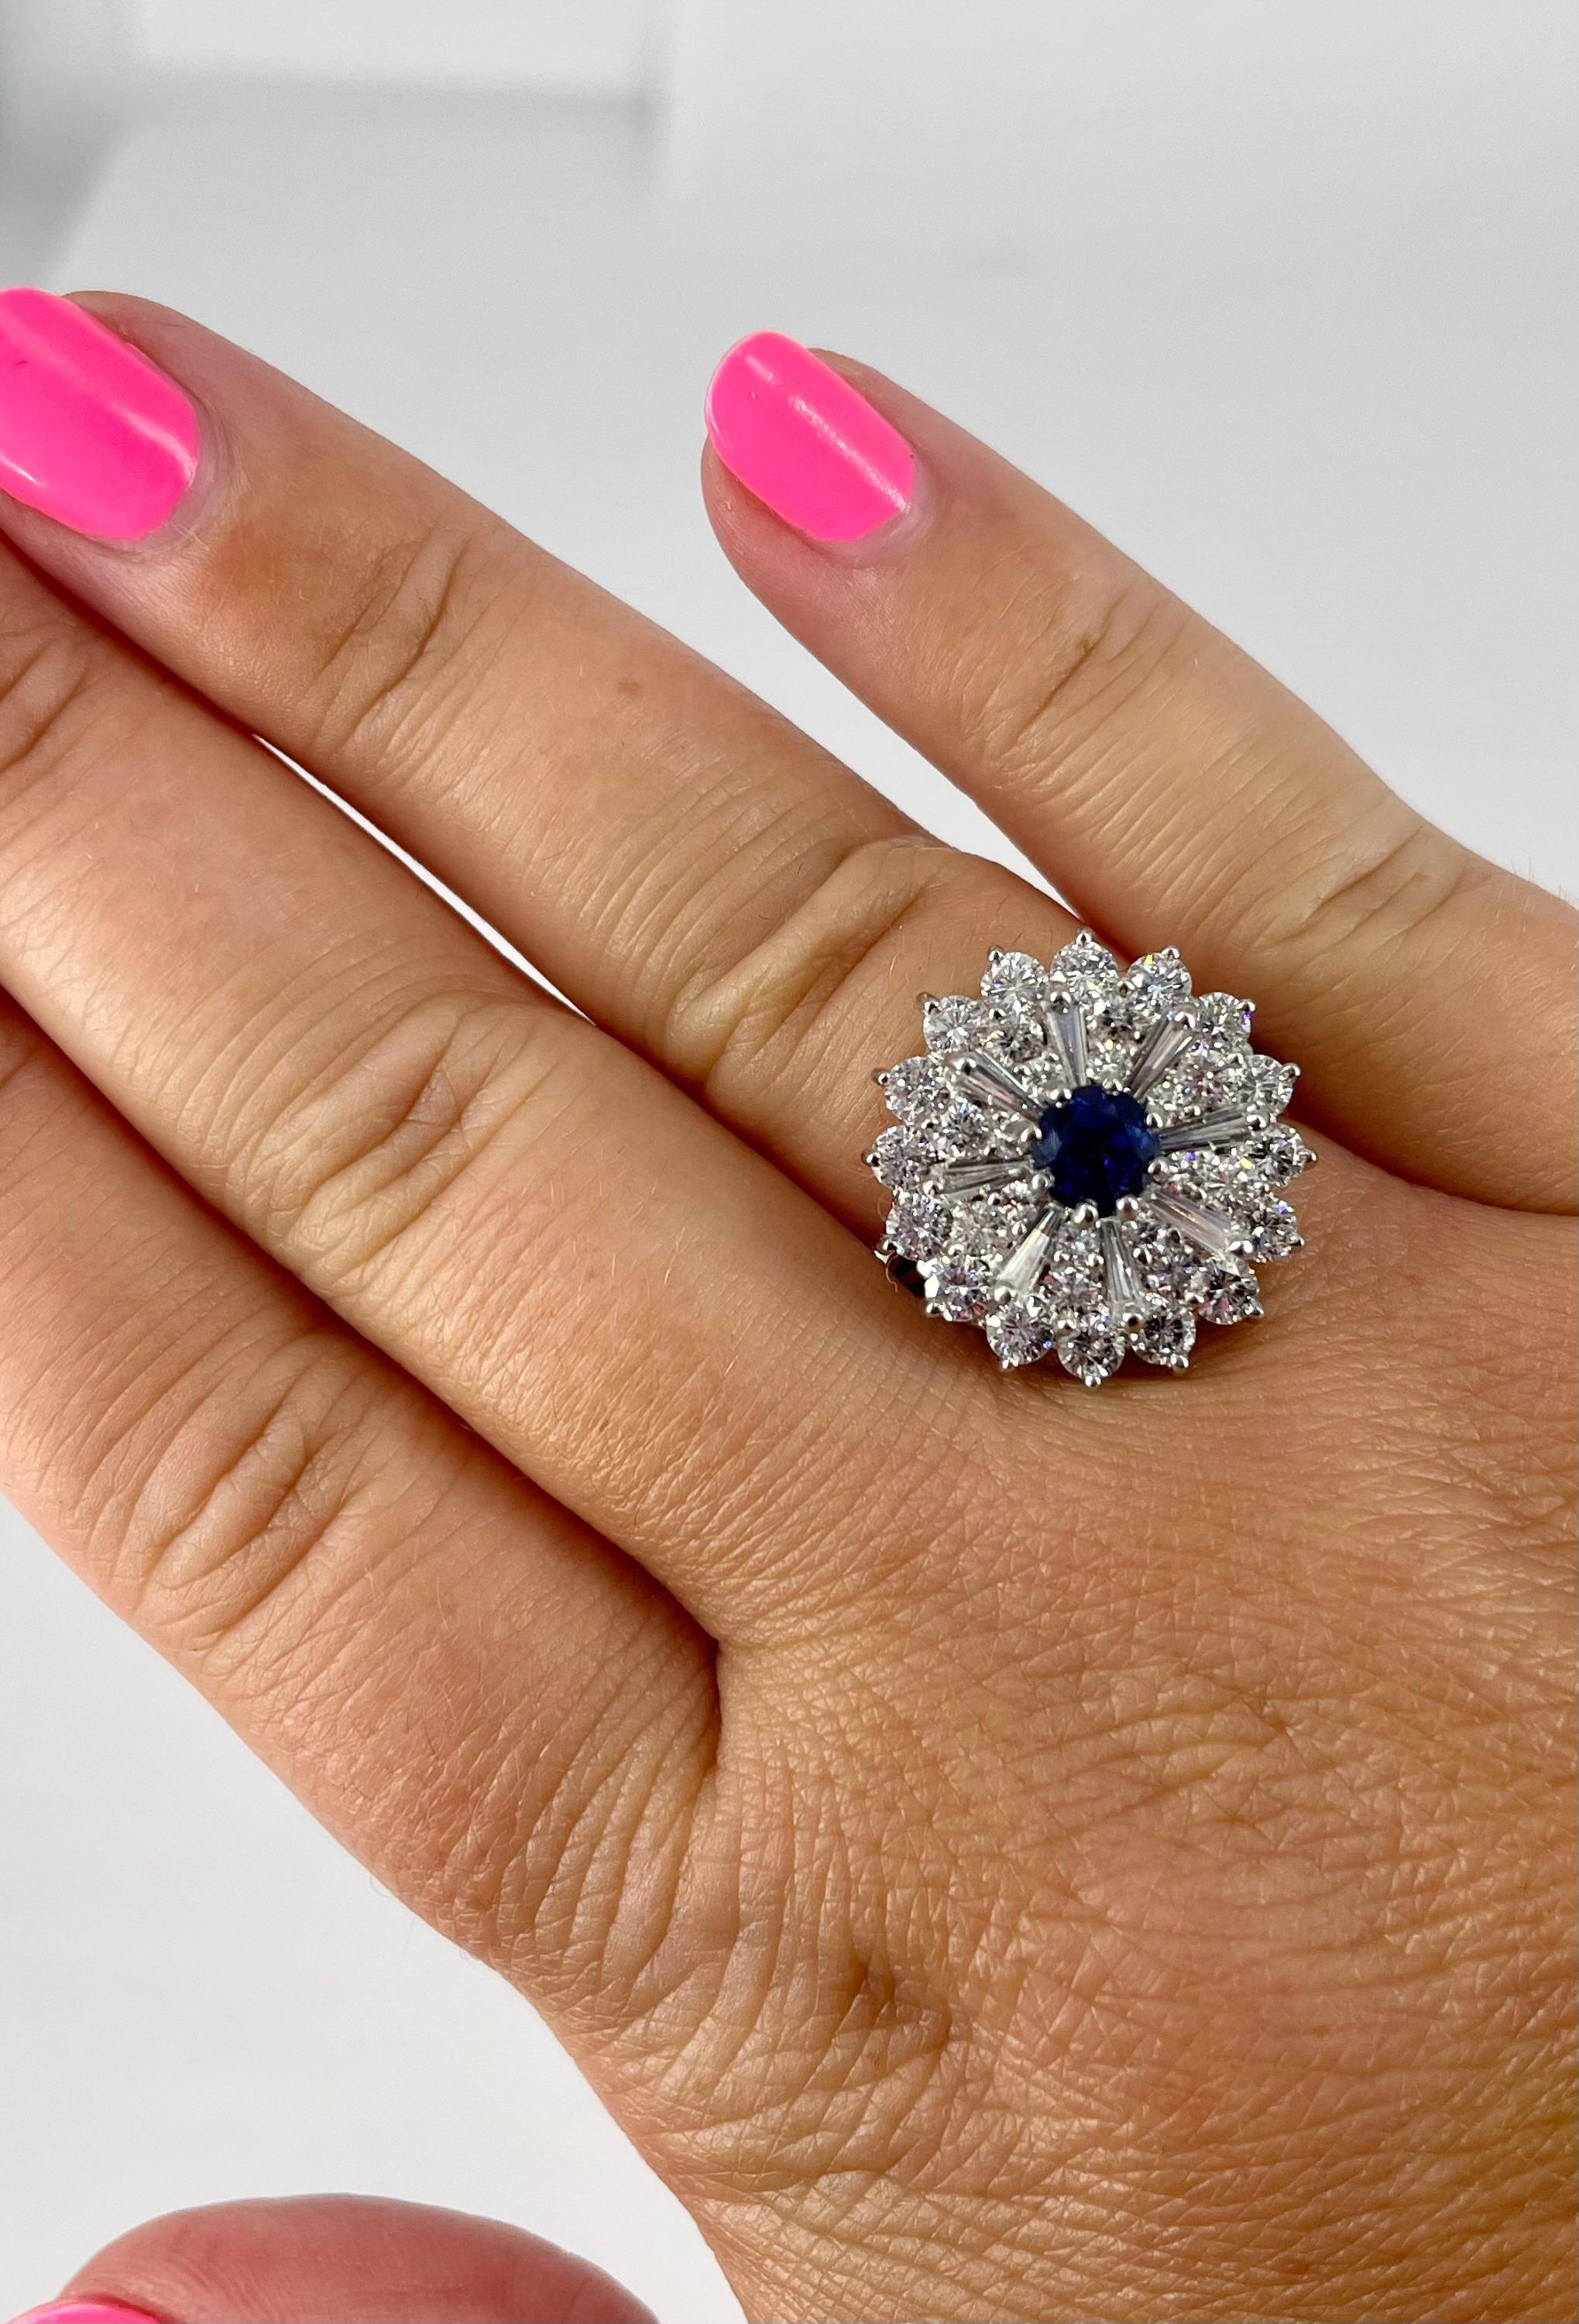 This handmade ring from the J. Birnbach vault features a dazzling array of diamonds with a velvety blue, sapphire center.  The intricate, three row halo is comprised of 32 G/H VS round brilliant cut diamonds = approximately 1.92 carat total weight